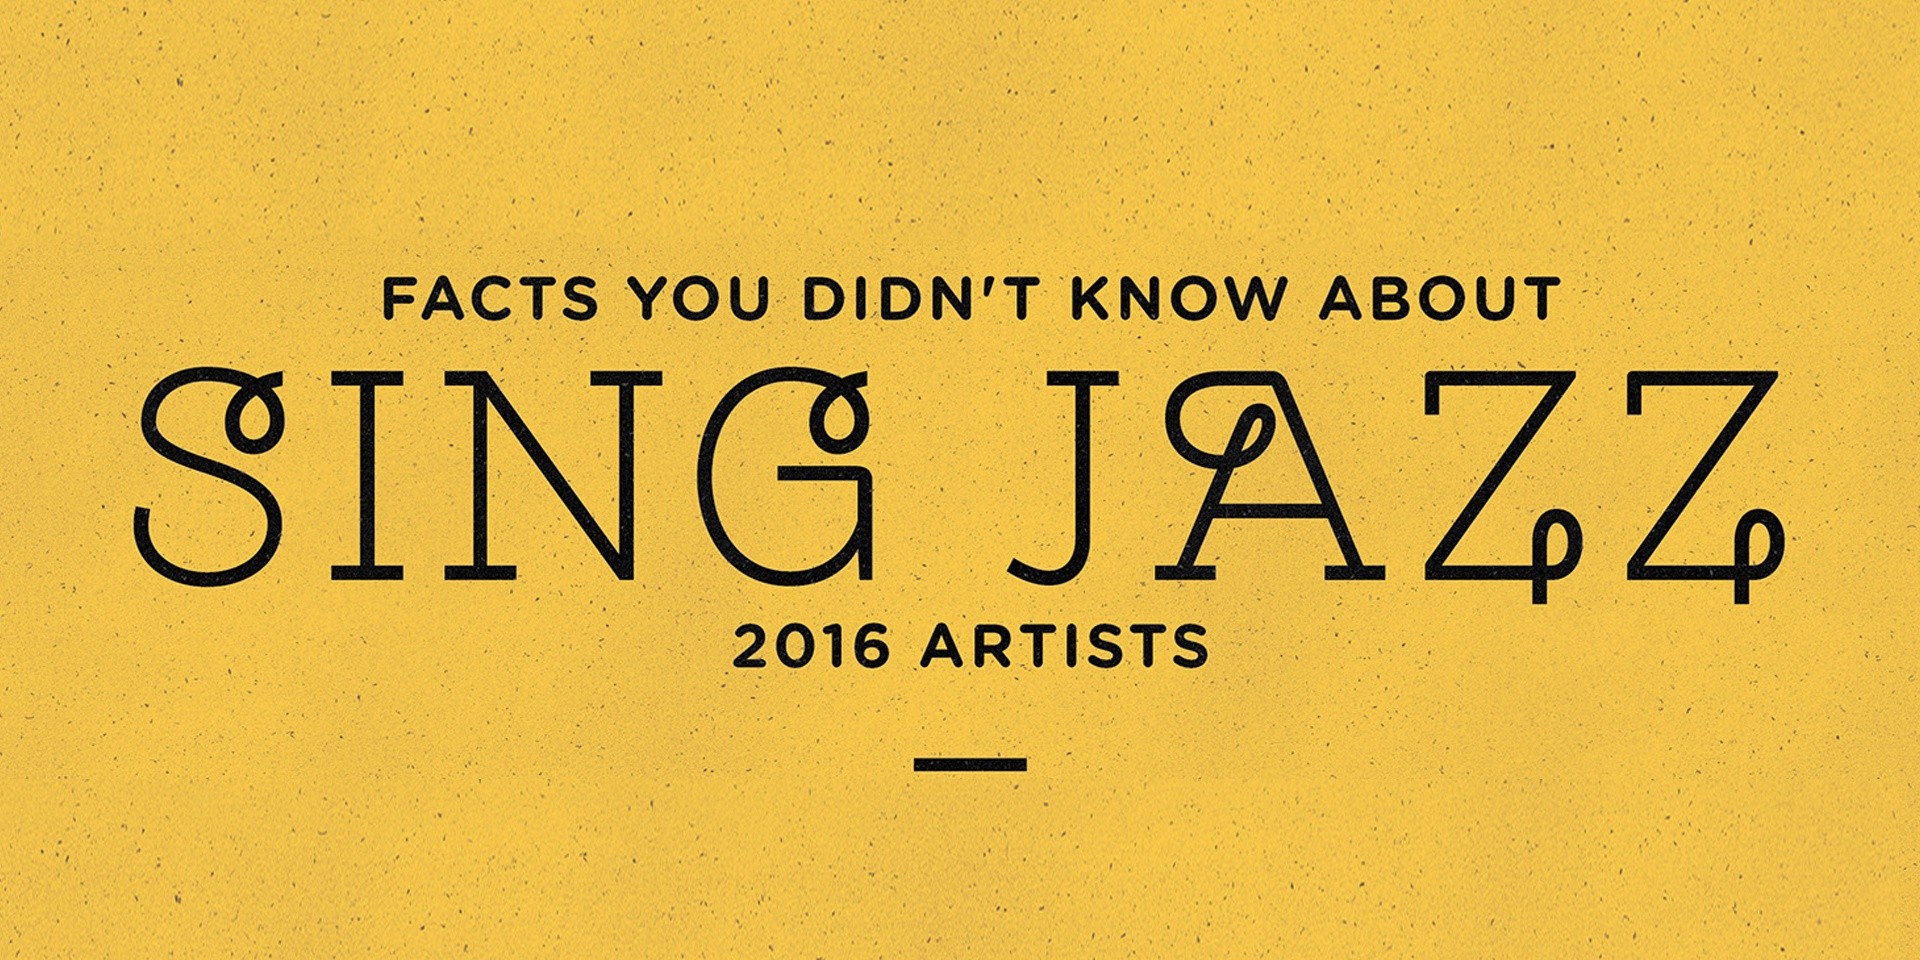 Facts you didn't know about Sing Jazz 2016 artists